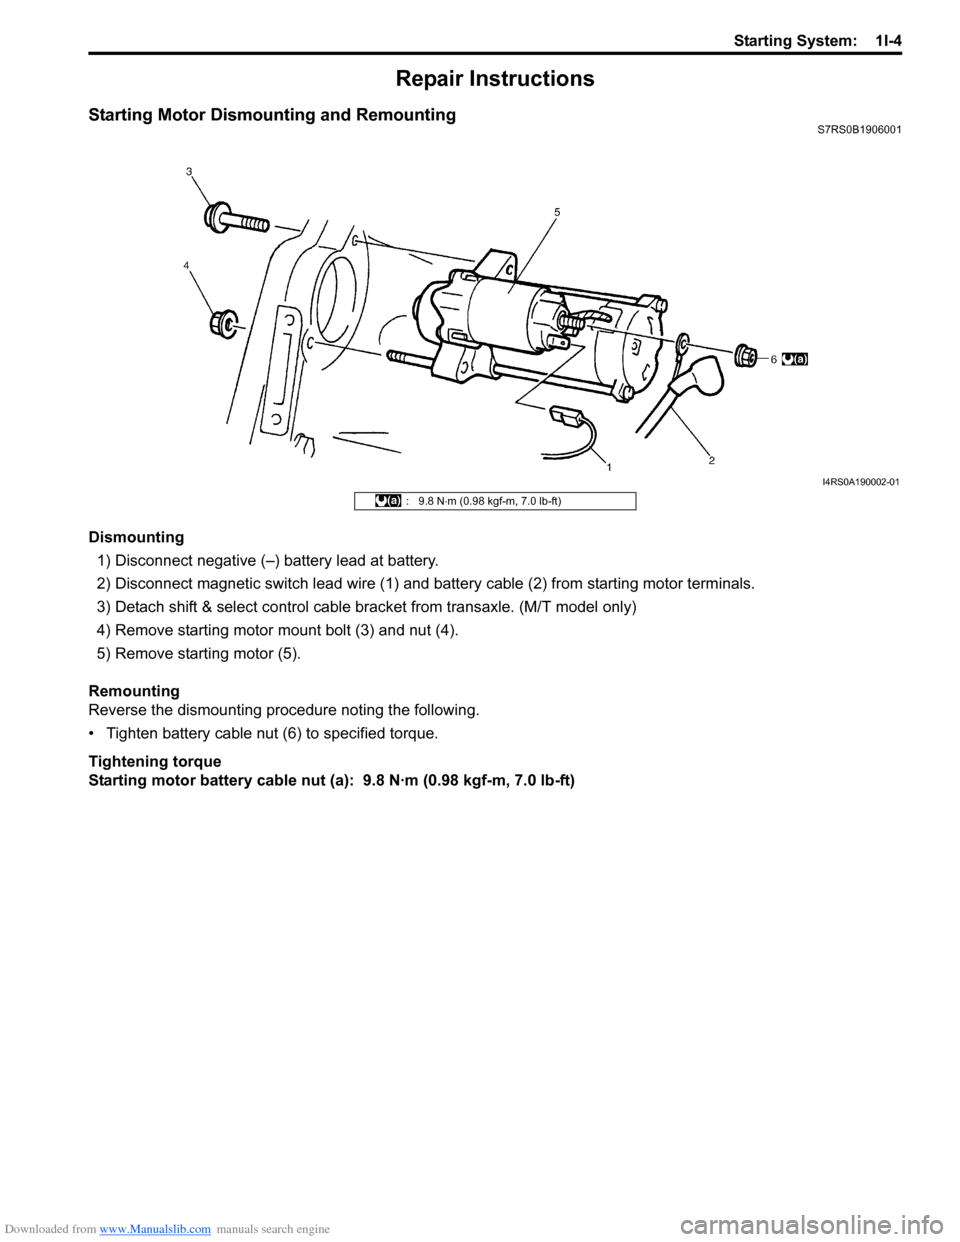 SUZUKI SWIFT 2006 2.G Service Workshop Manual Downloaded from www.Manualslib.com manuals search engine Starting System:  1I-4
Repair Instructions
Starting Motor Dismounting and RemountingS7RS0B1906001
Dismounting1) Disconnect negative (–) batte